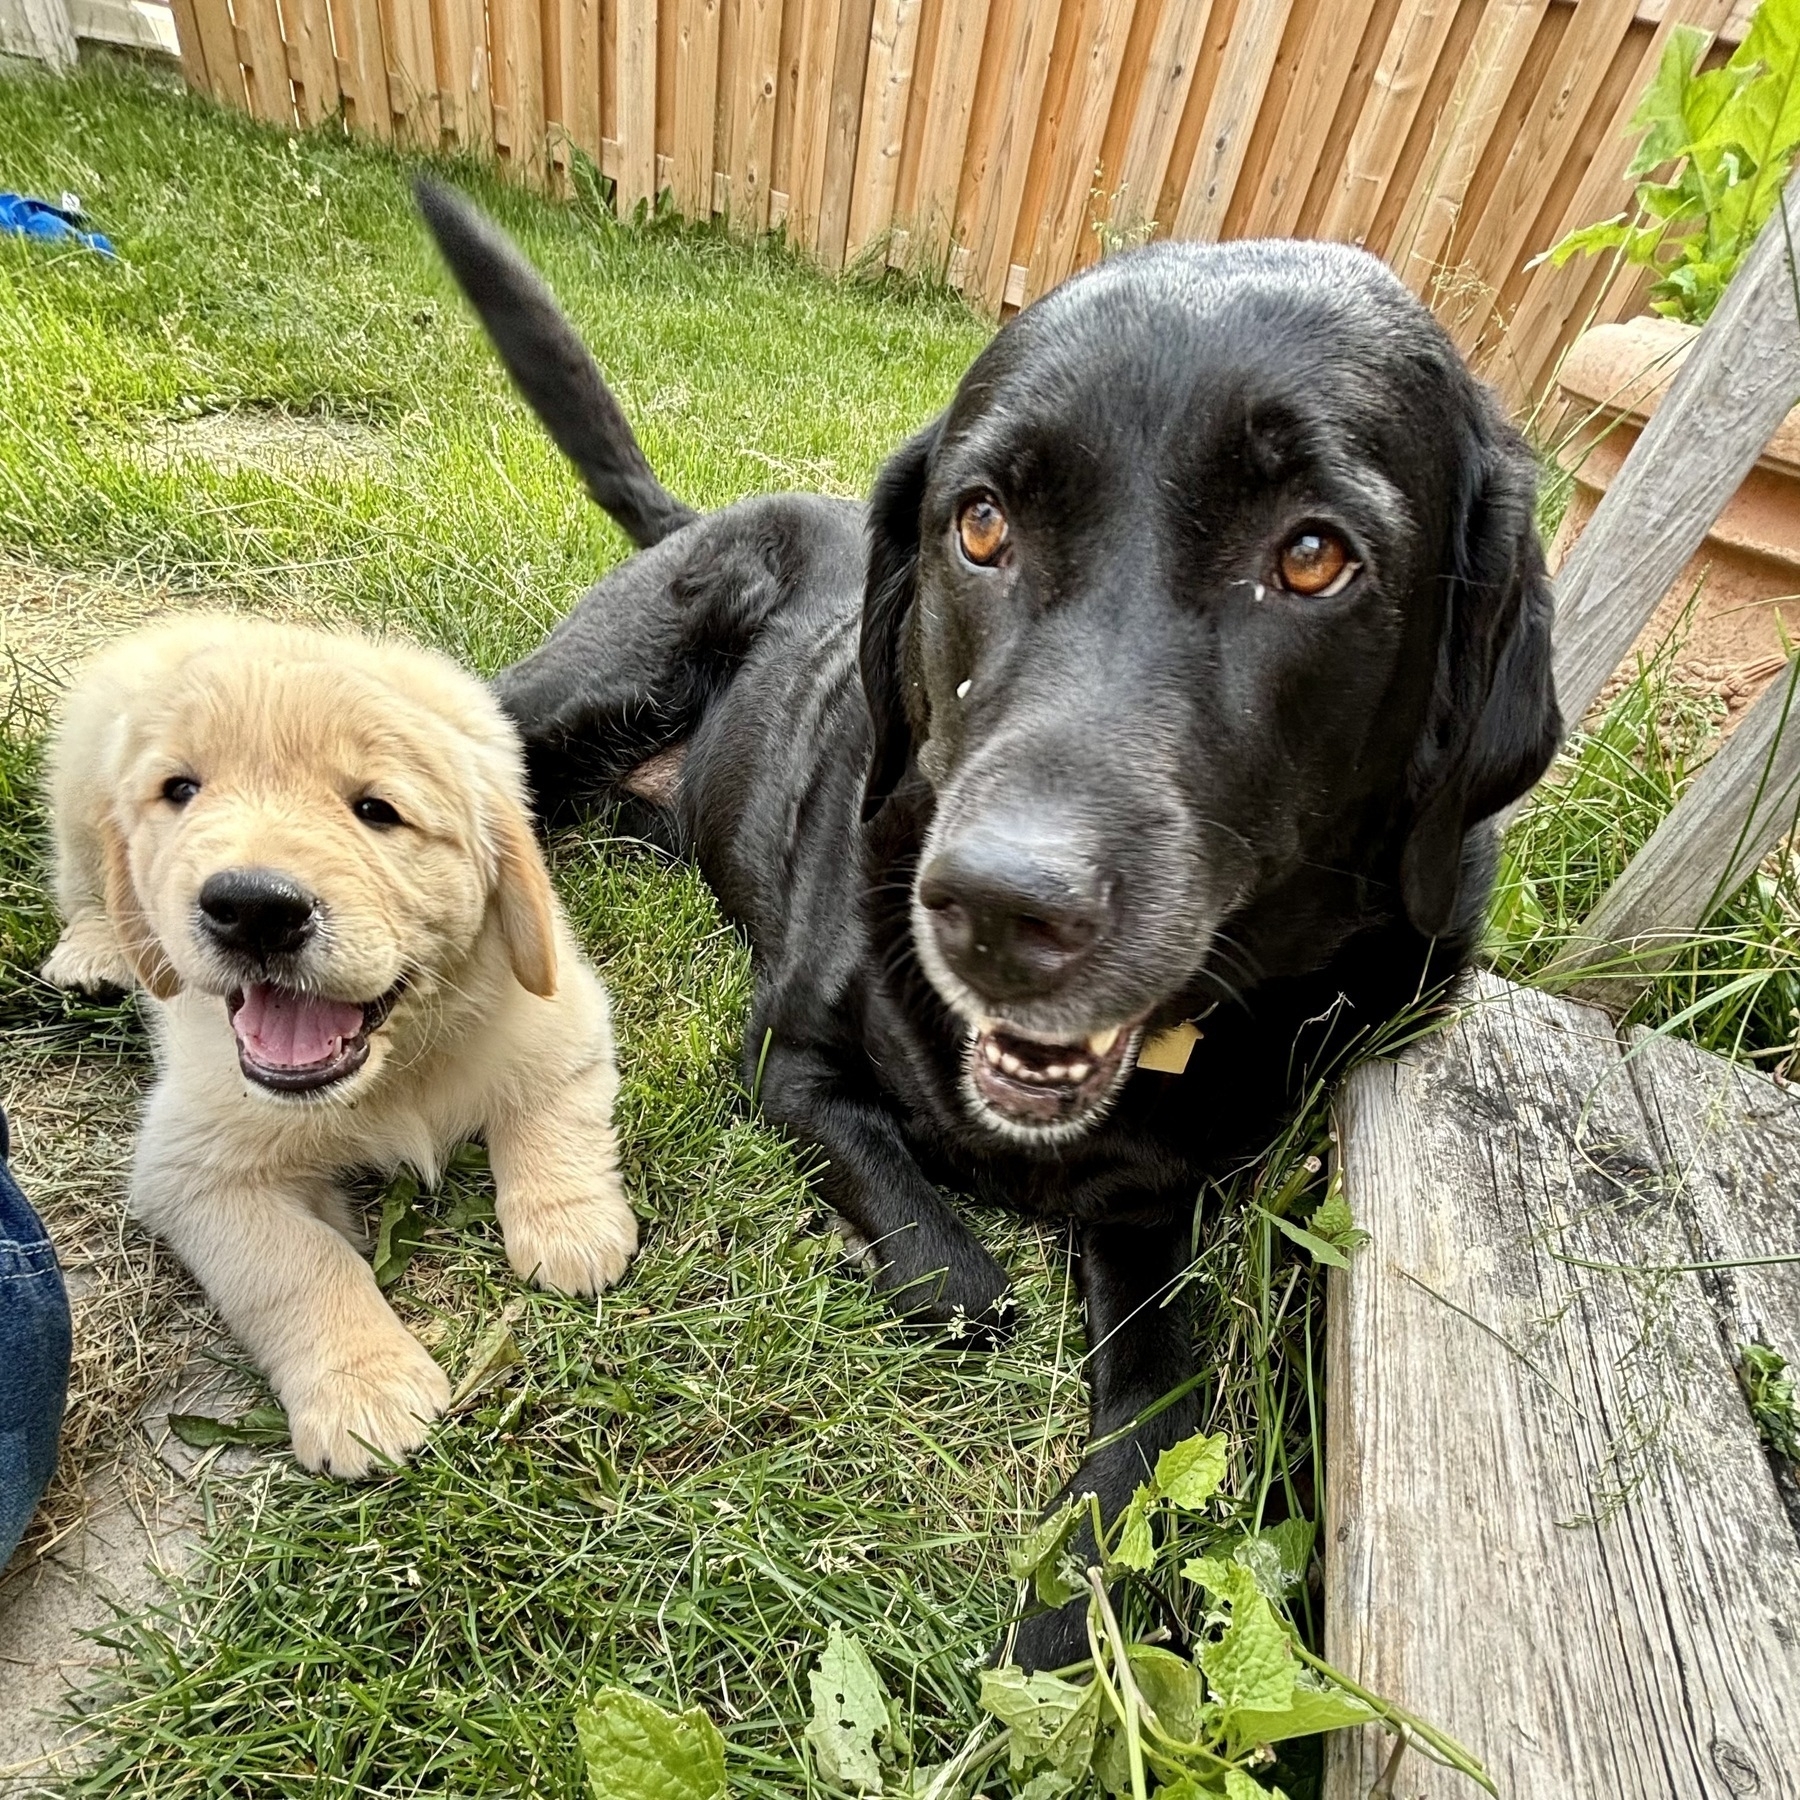 Two dogs, a black one and a golden retriever puppy, are sitting on grass in a backyard near a wooden fence.